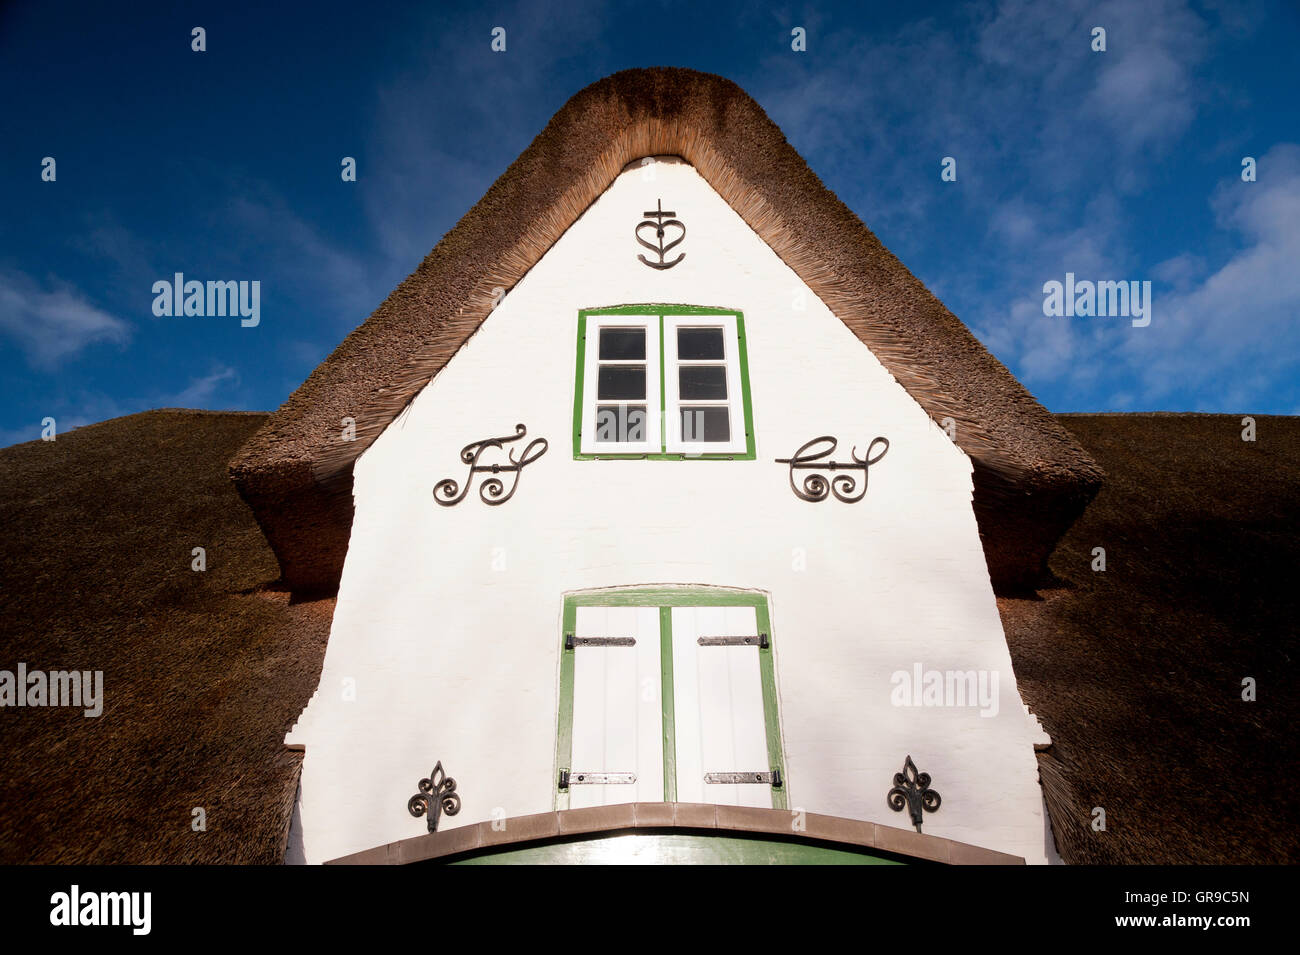 Thatched Roof House On Amrum In Germany Stock Photo